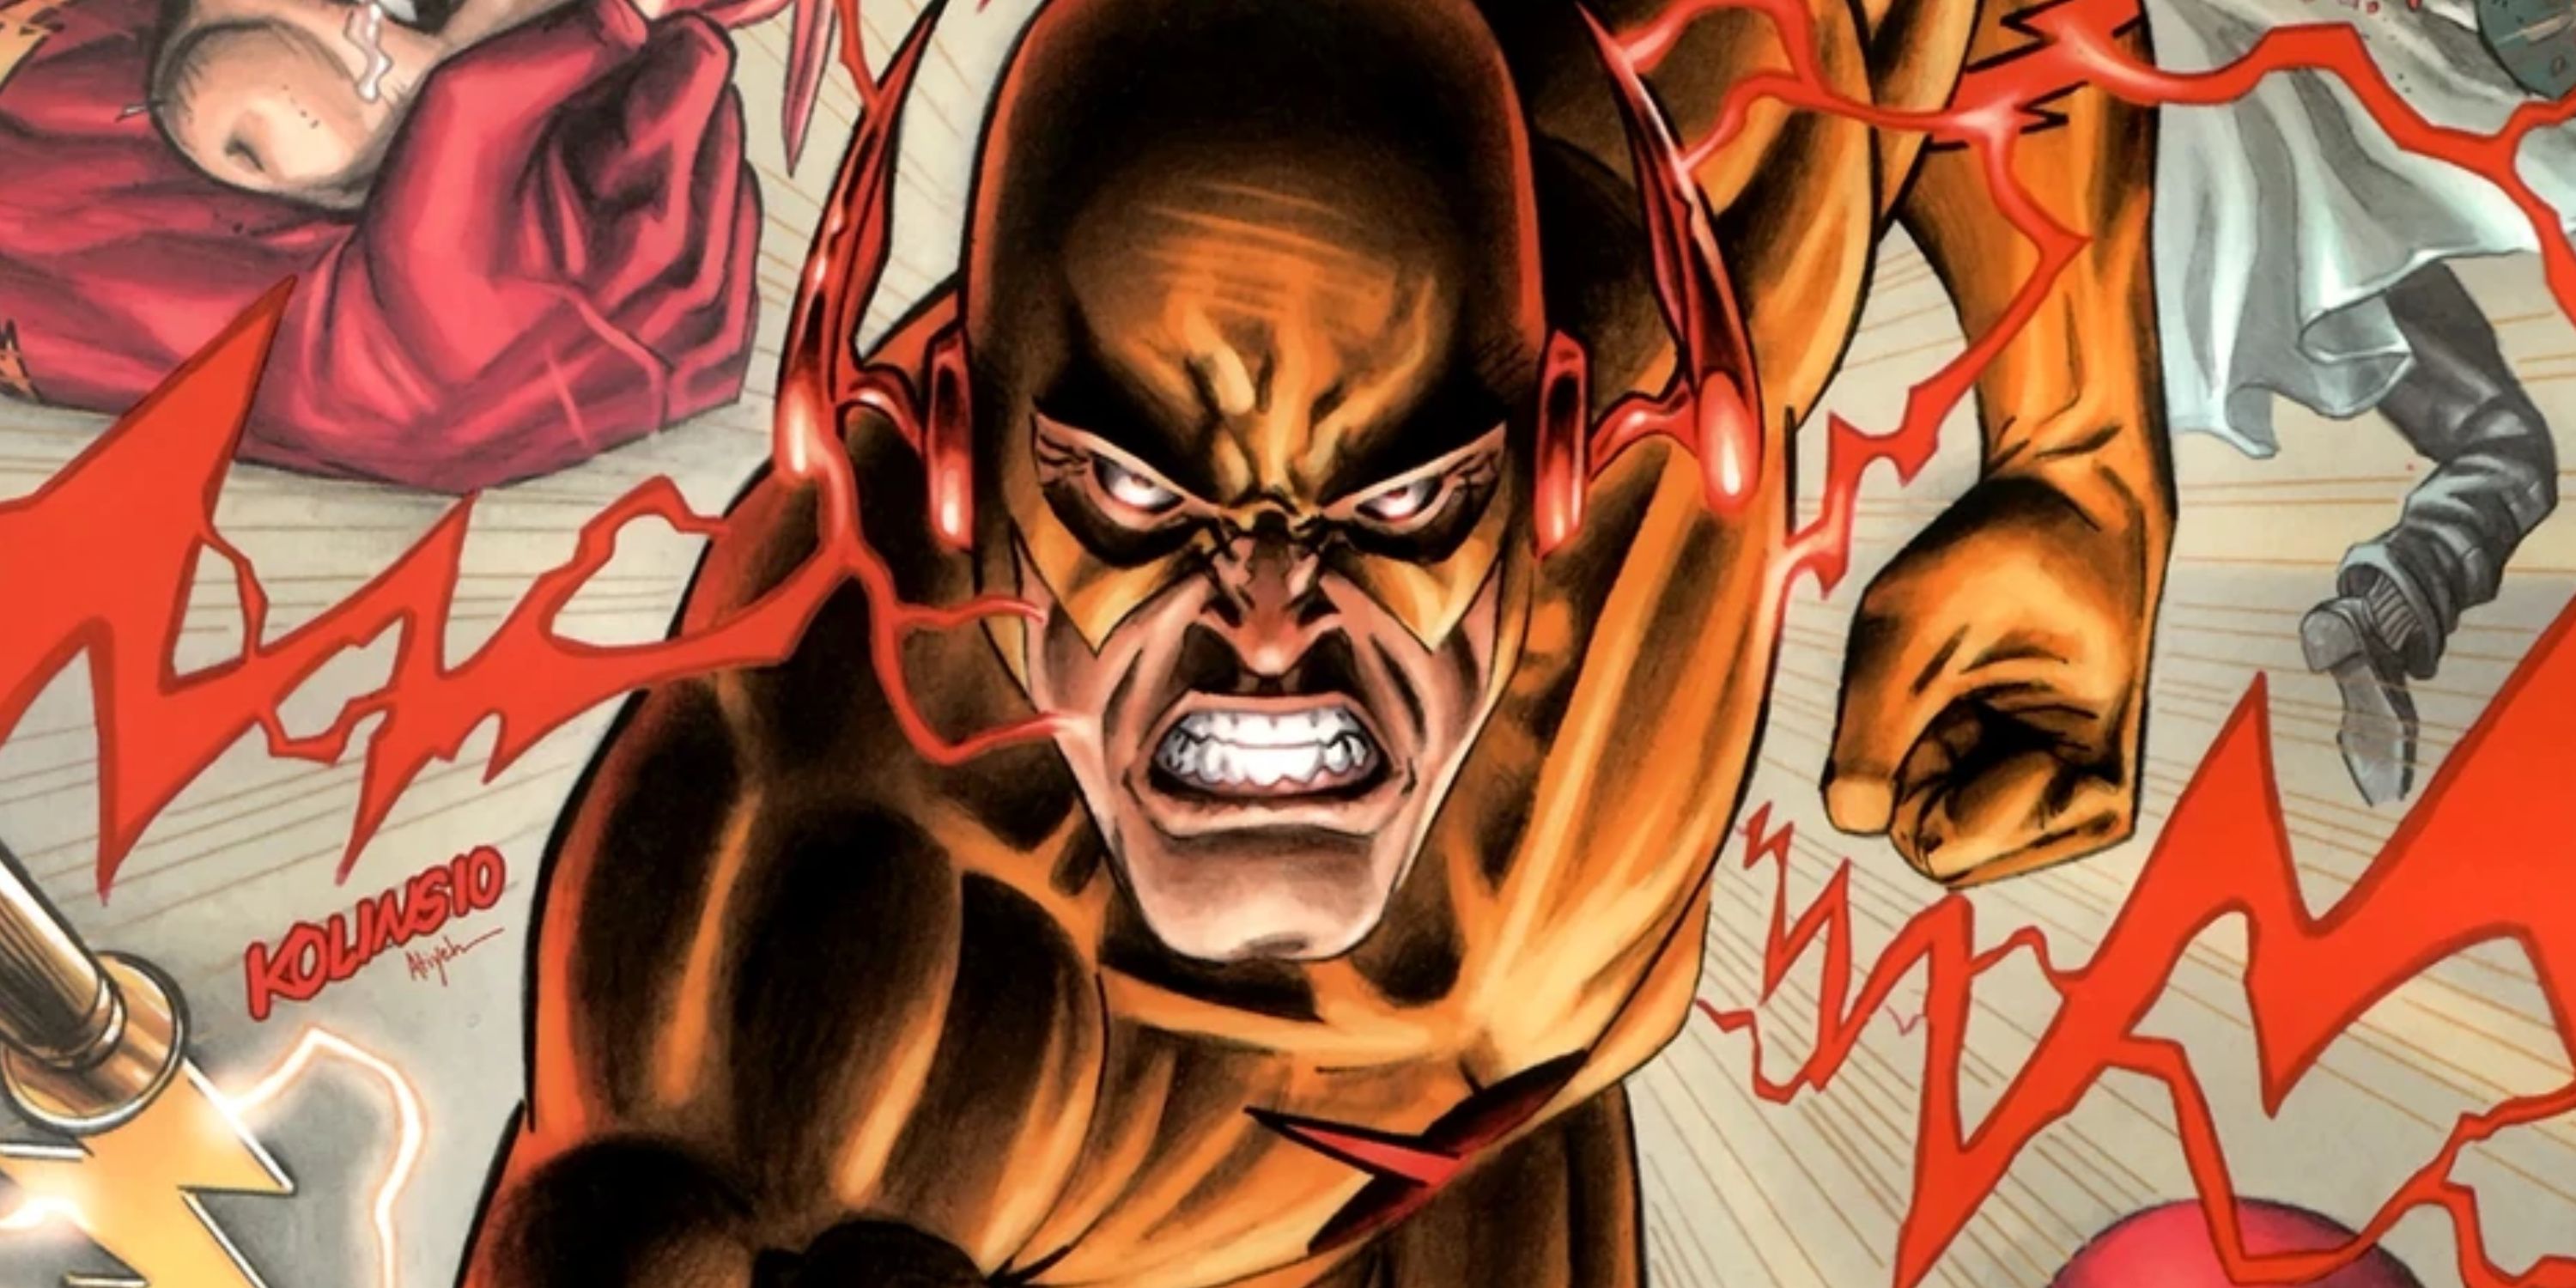 The cover to The Flash Vol. 3 #8 from DC Comics, featuring an enraged Reverse Flash